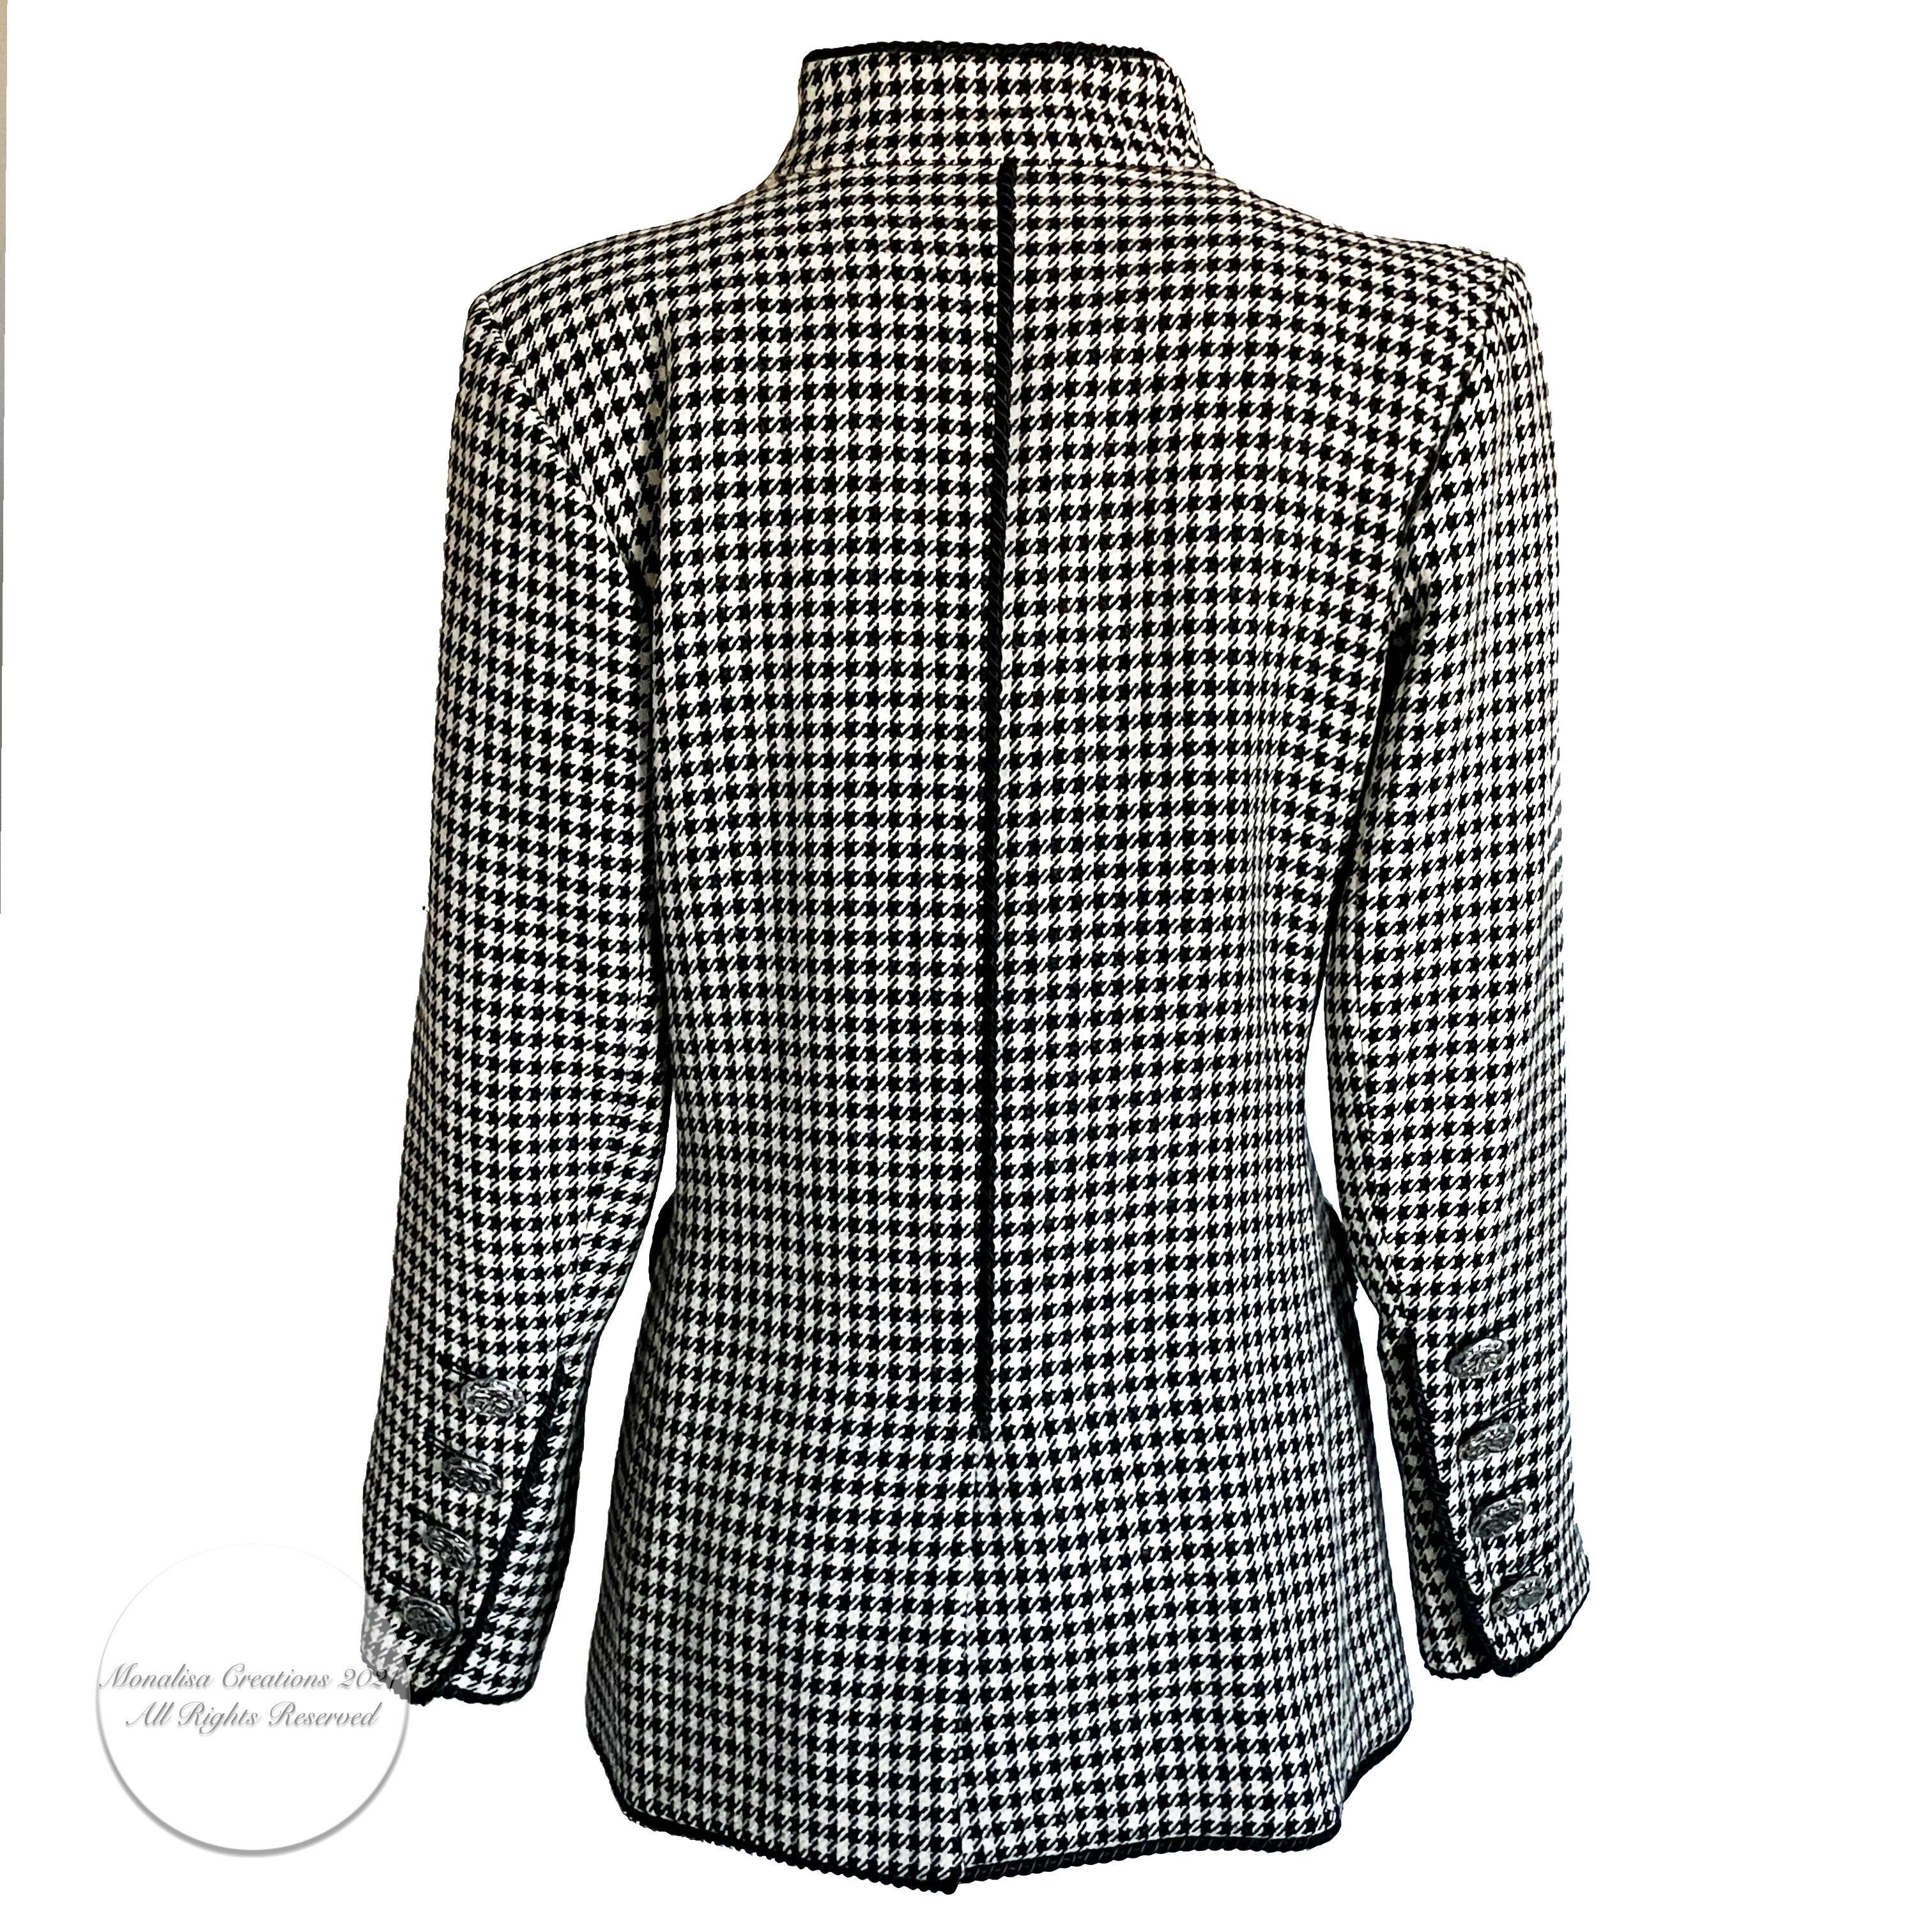 Yves Saint Laurent Jacket Houndstooth Wool Black Rope Trim Floral Buttons Sz 40 6